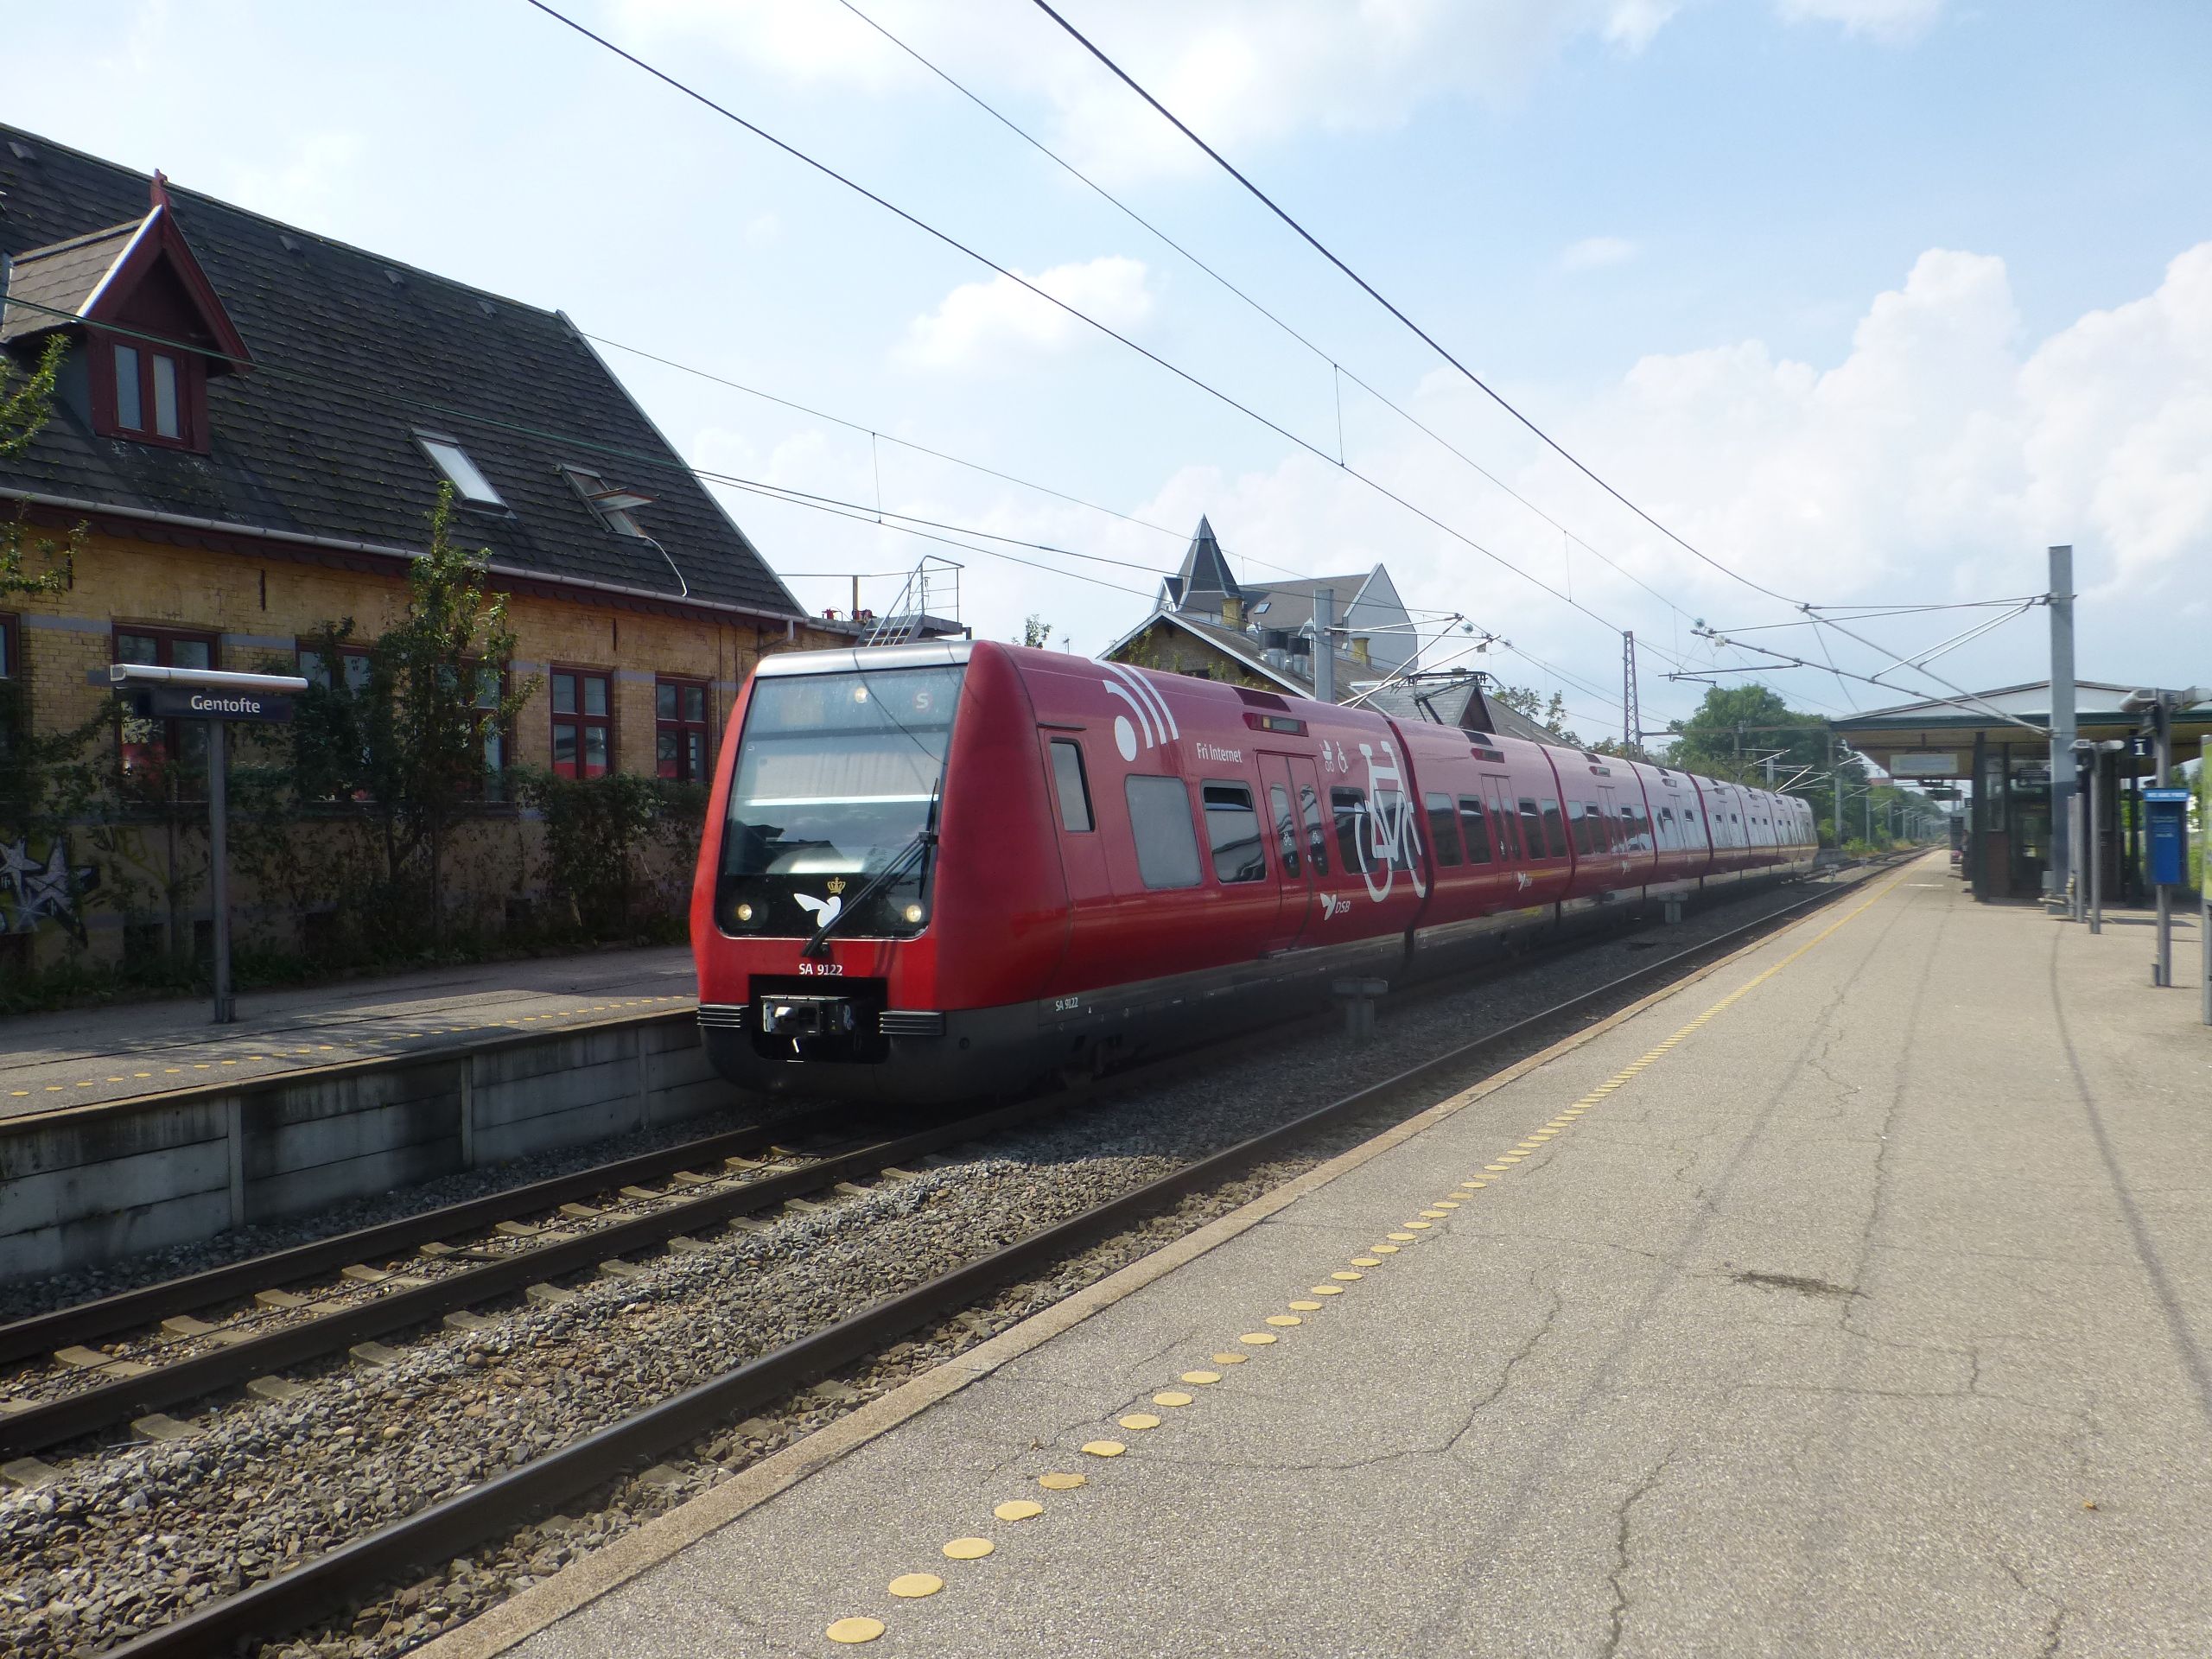 Danish state train operator behind schedule and over budget on switching signals